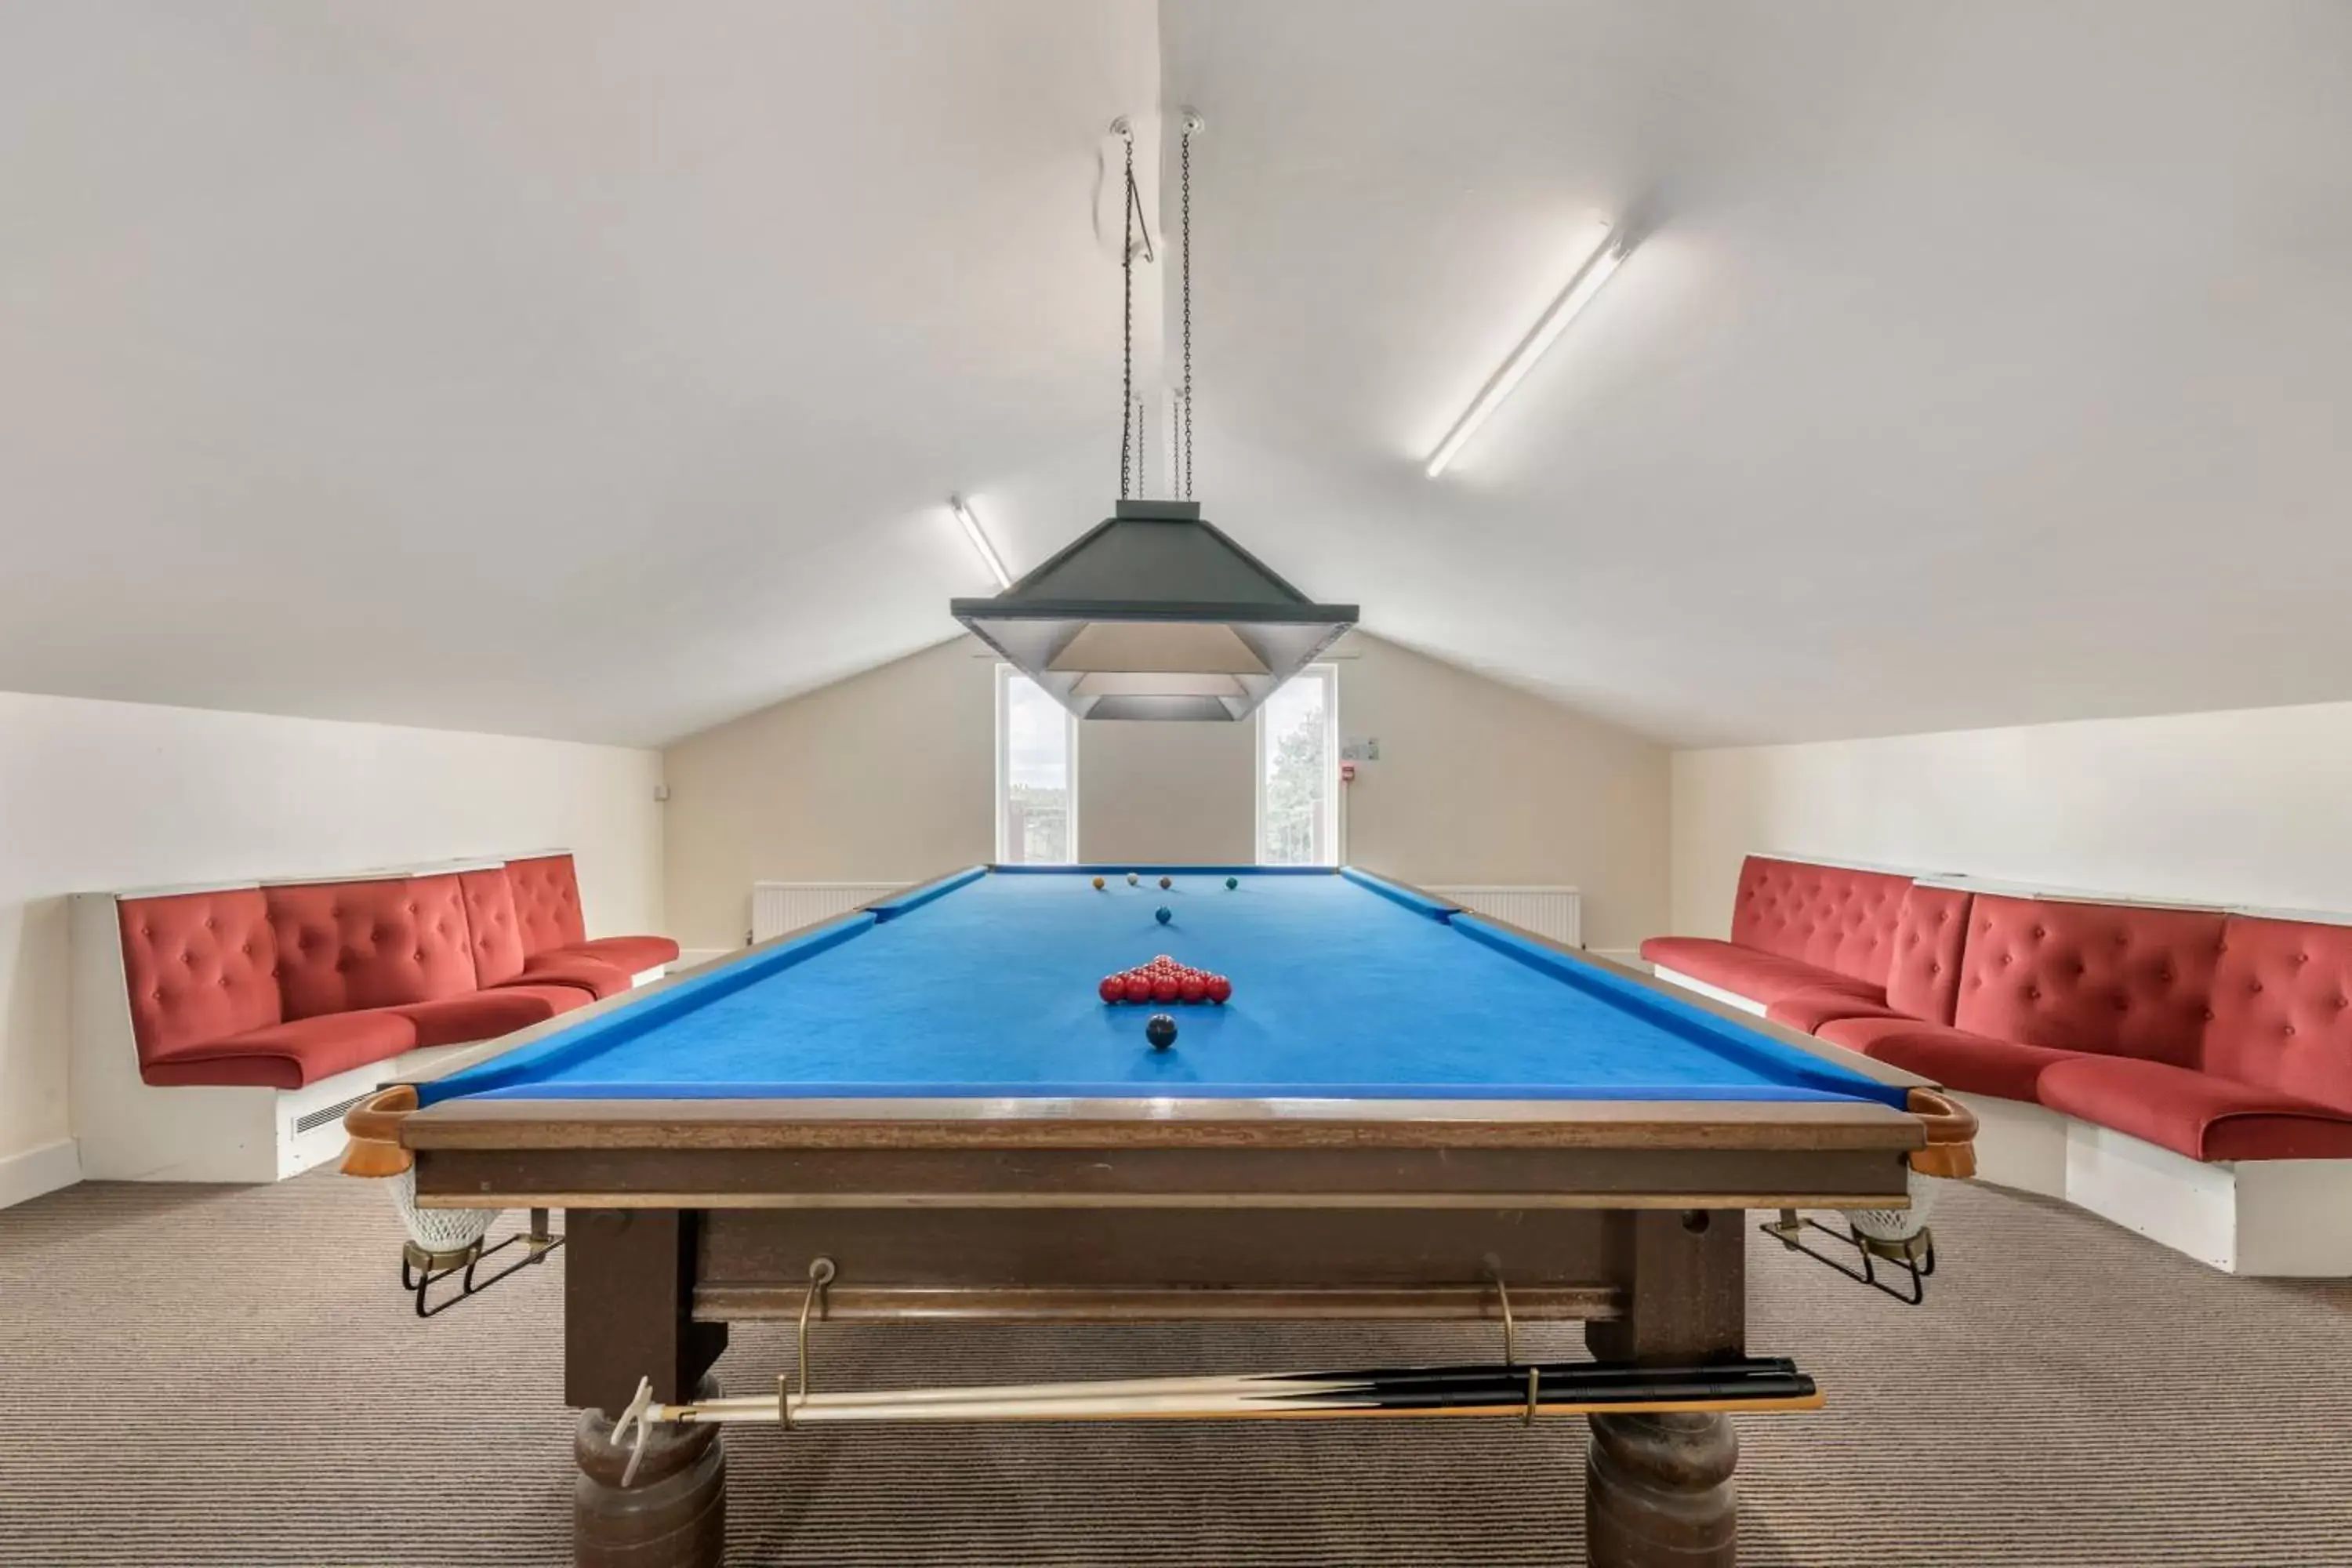 Game Room, Billiards in Cromer Country Club